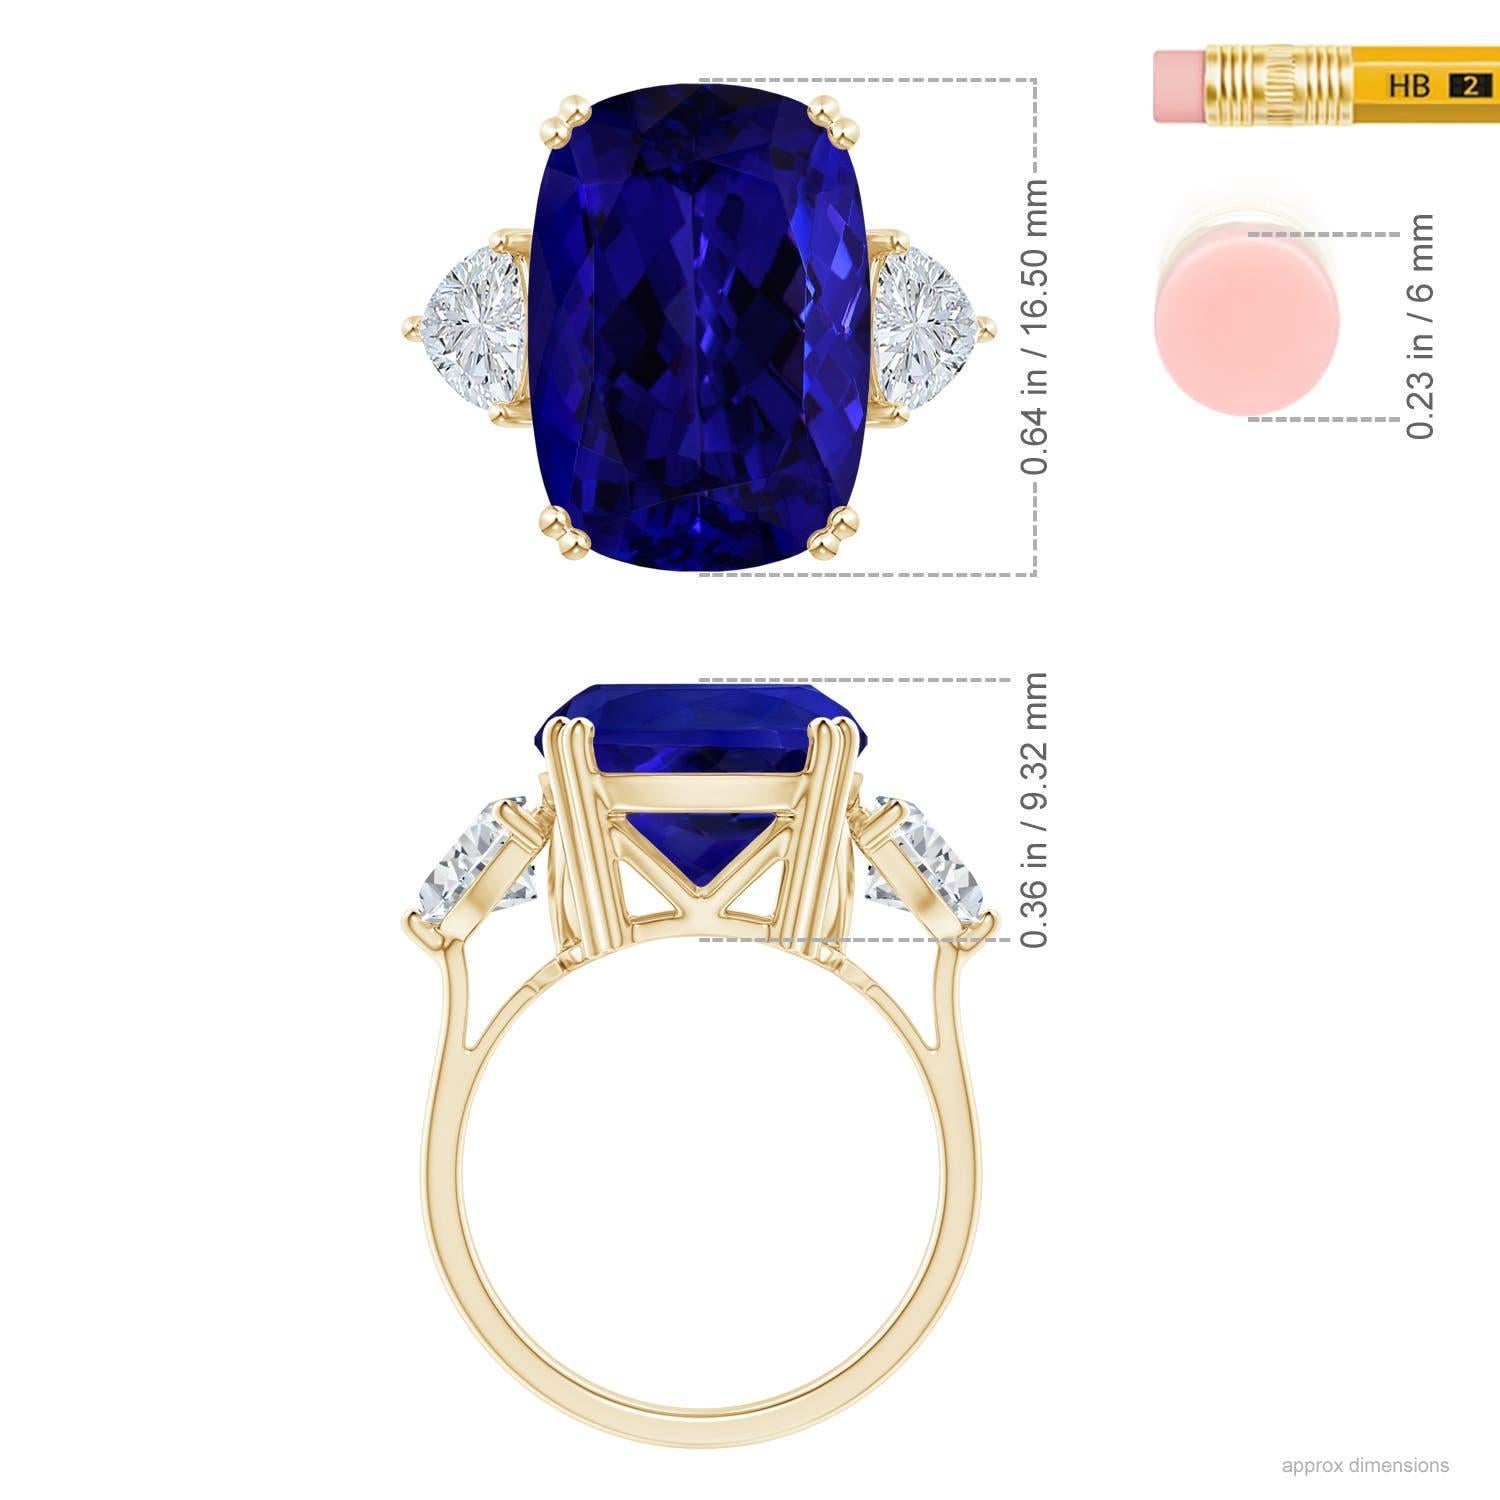 For Sale:  Flanked by Sparkling Trillion Diamonds Is a GIA Certified Cushion Tanzanite Held 5